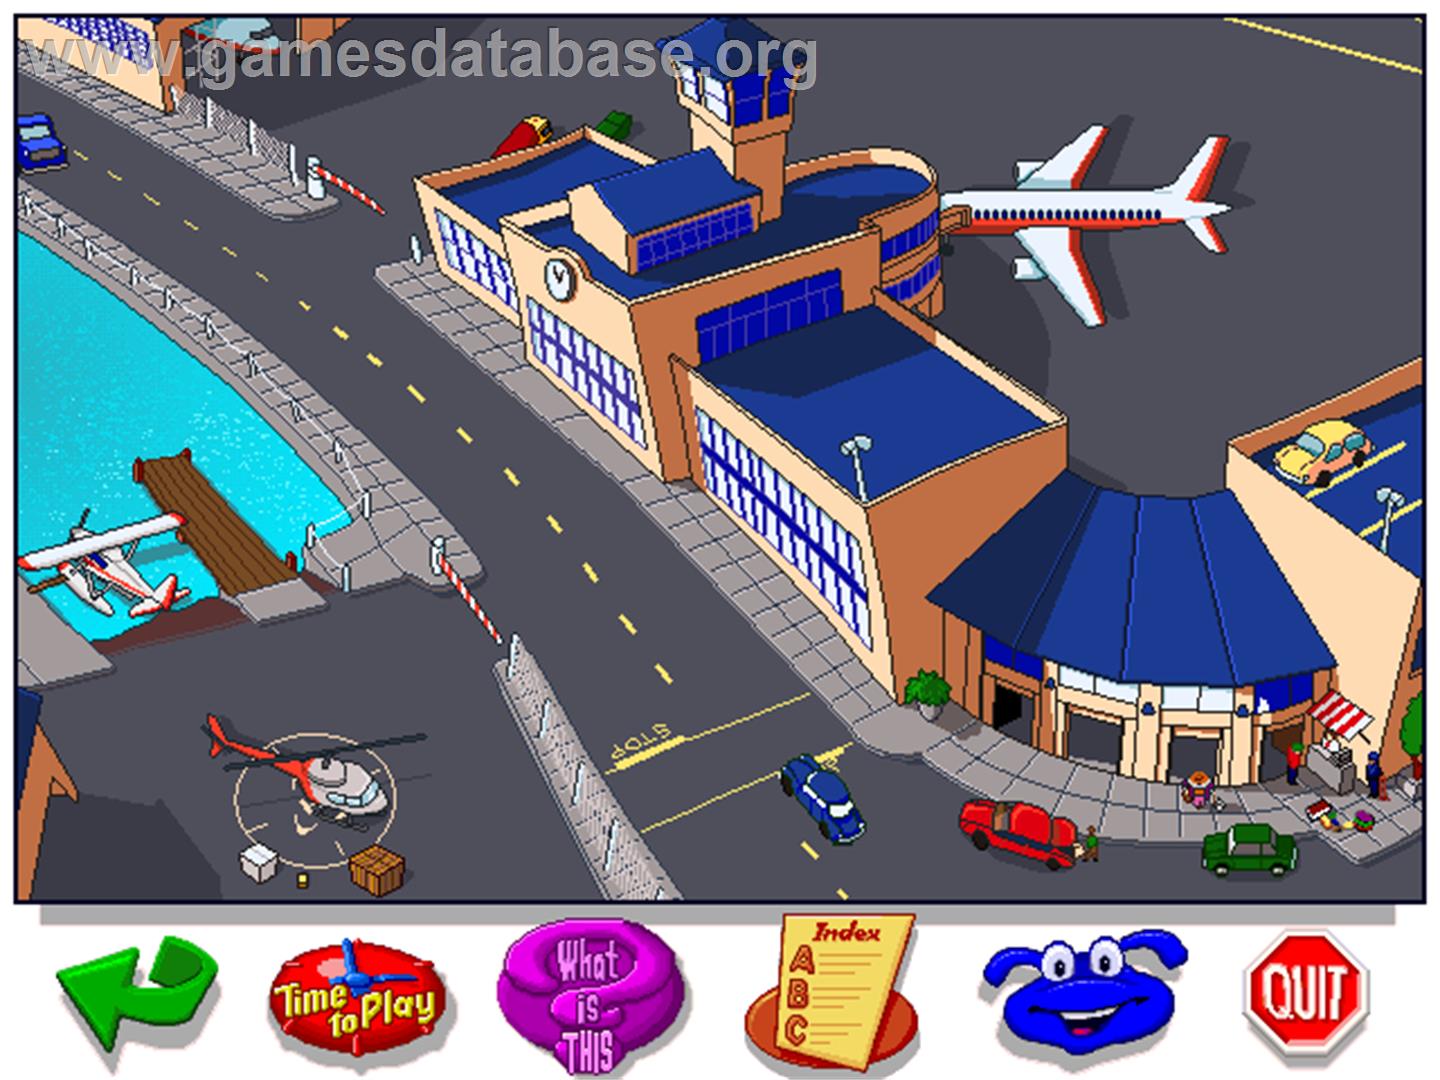 Let's Explore the Airport with Buzzy - ScummVM - Artwork - In Game